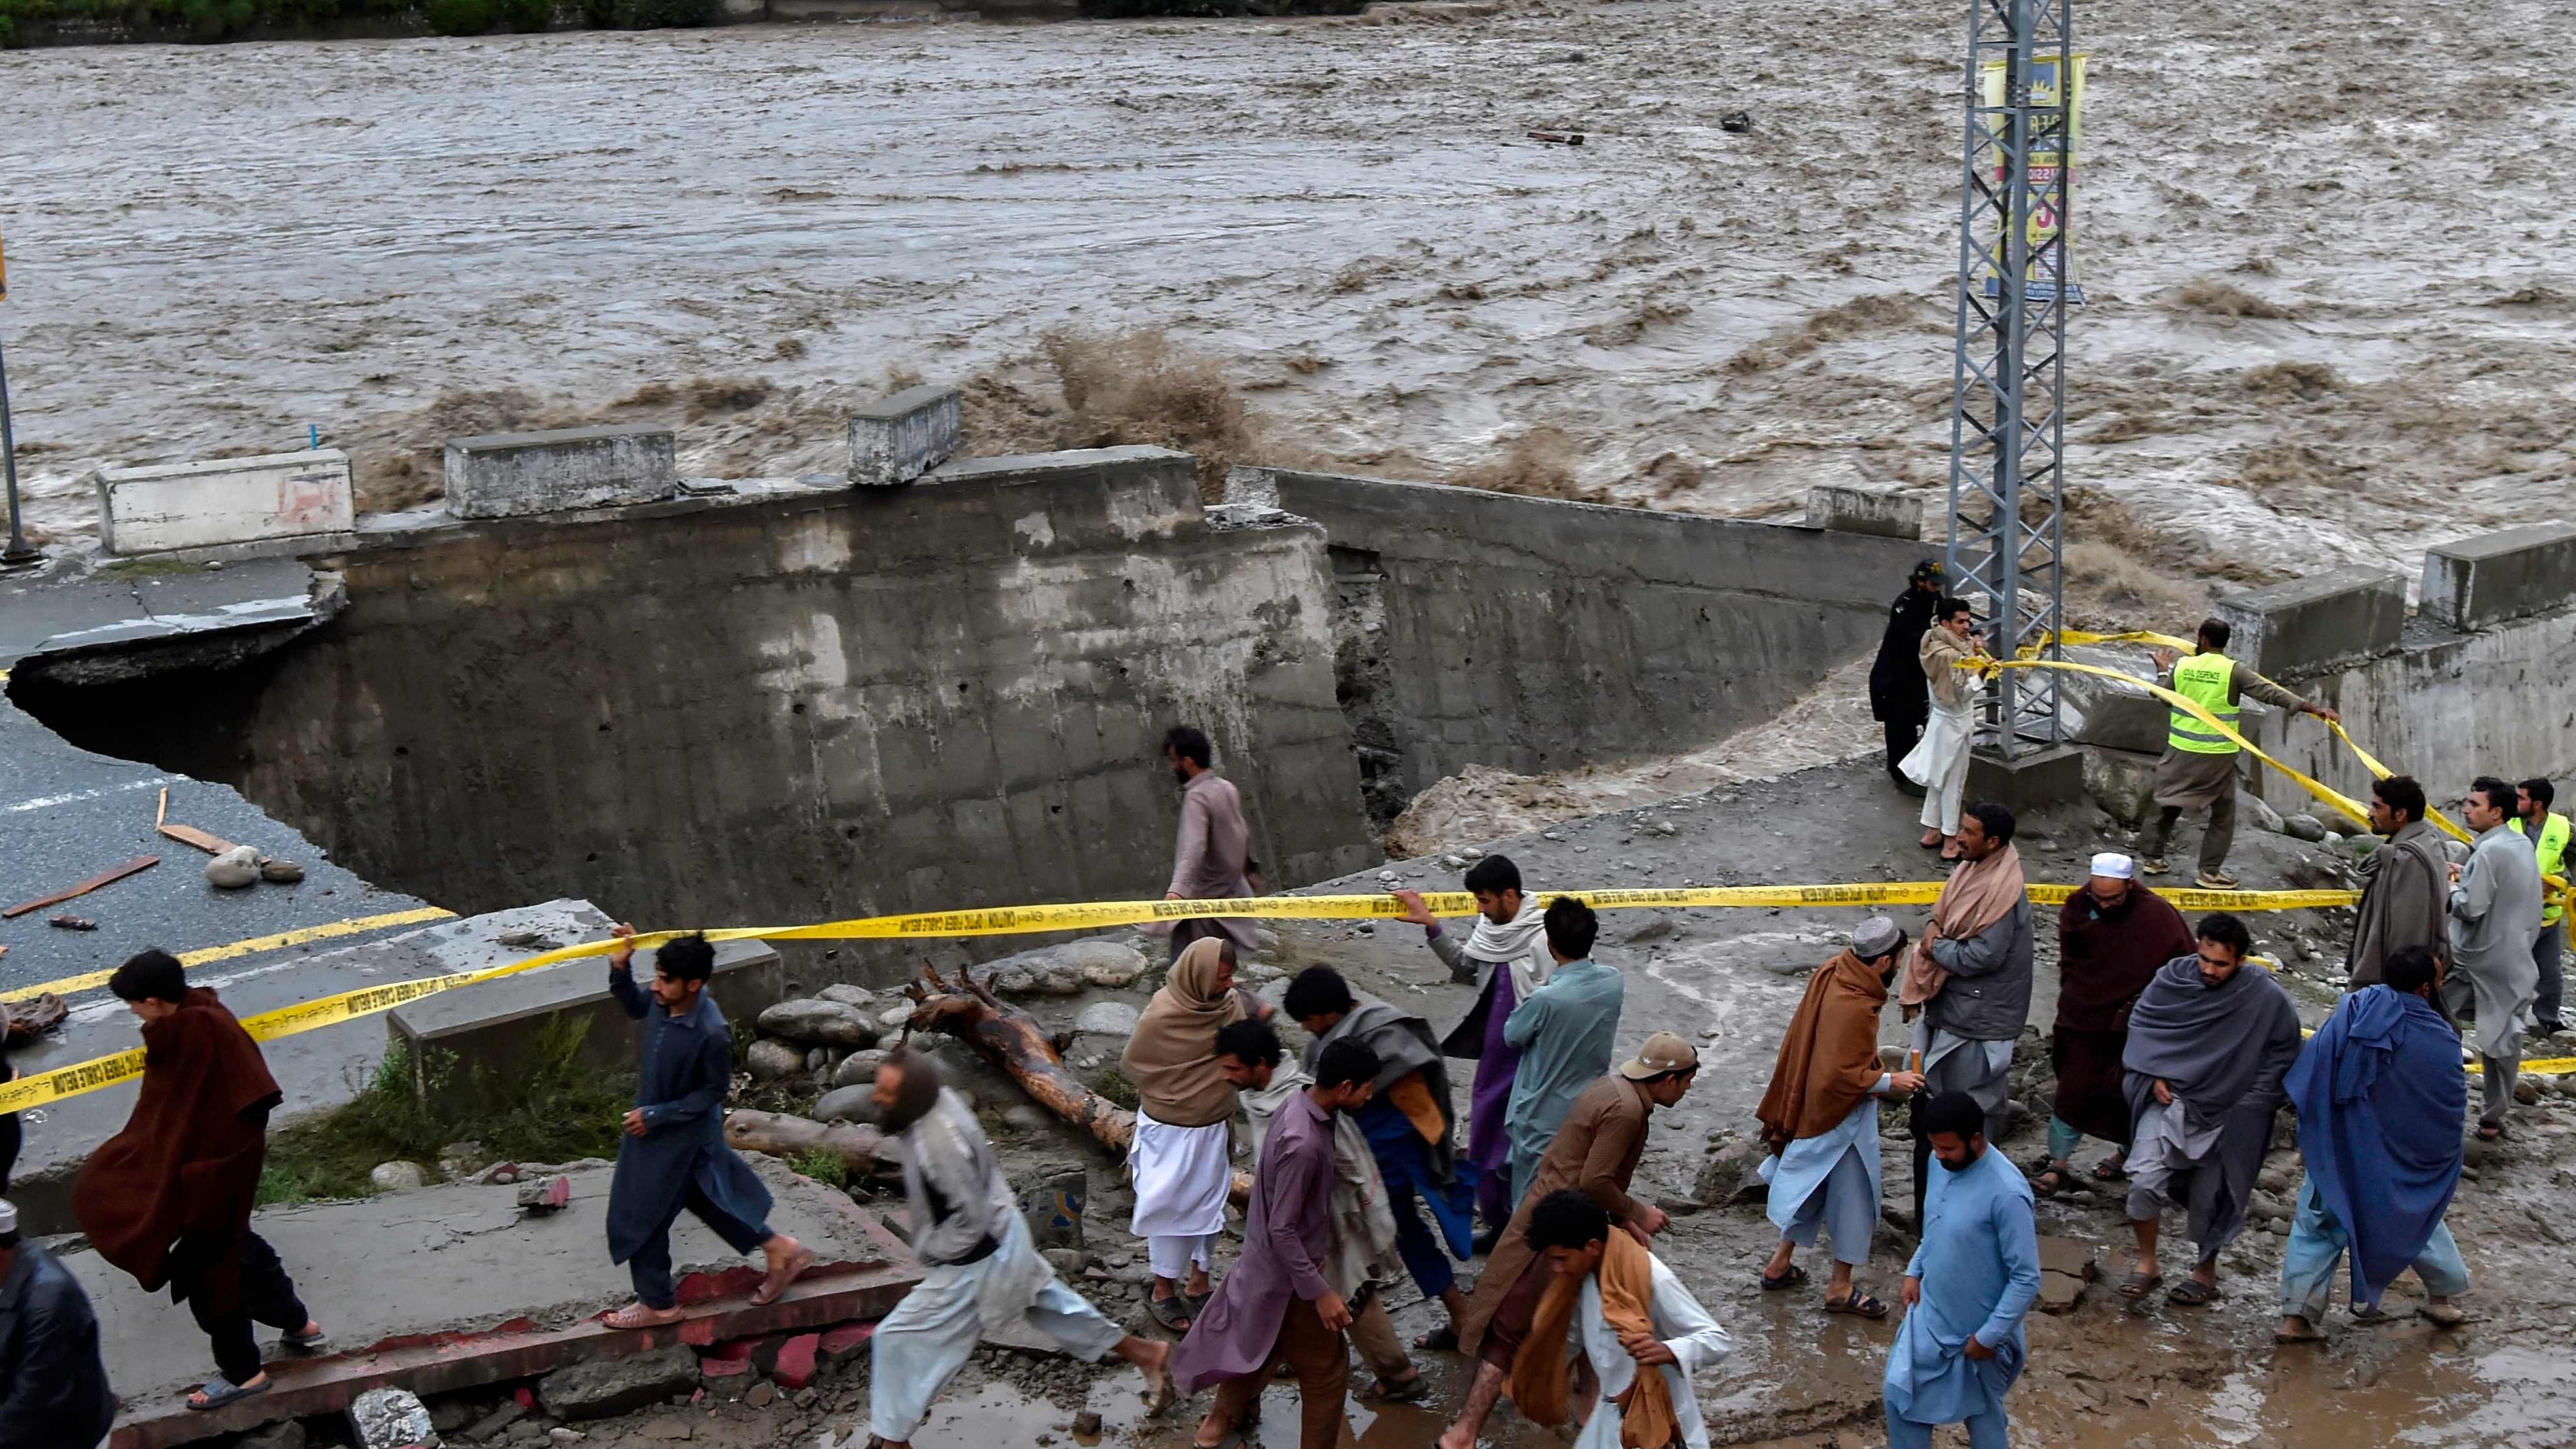 People gather in front of a road damaged by flood waters following heavy monsoon rains in Madian area in Pakistan's northern Swat Valley on August 27. Credit: AFP Photo